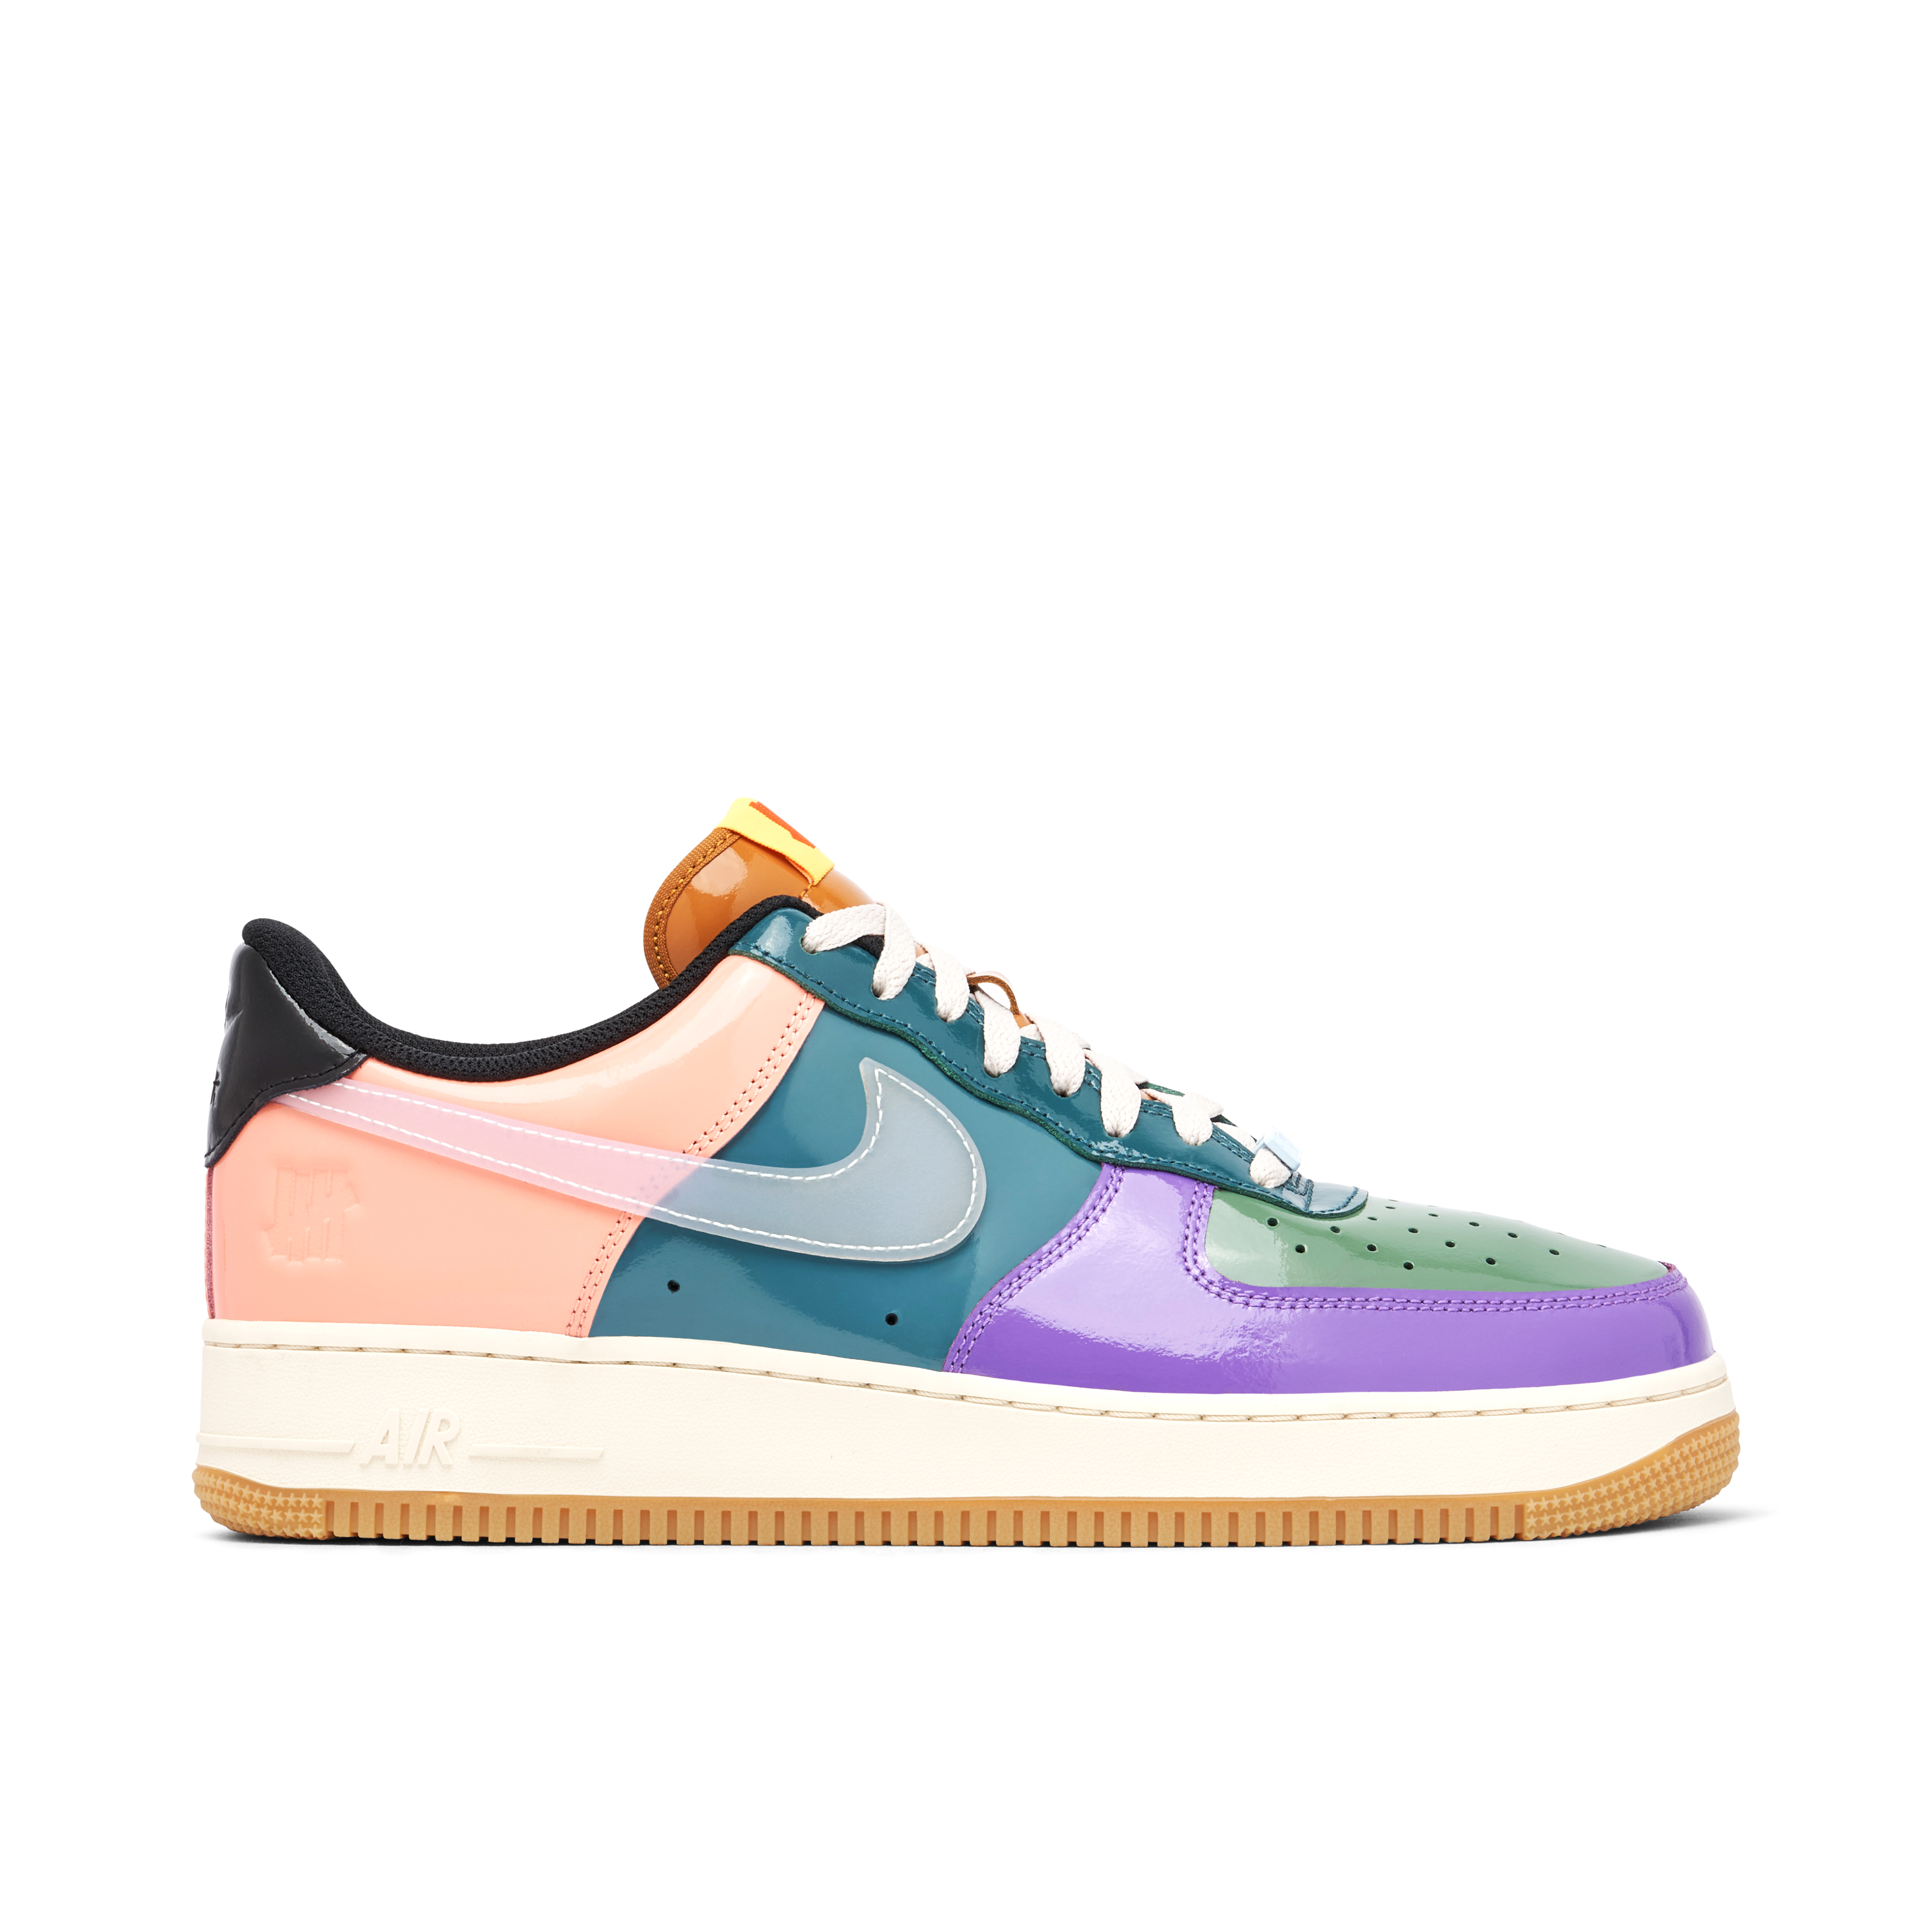 Nike Air Force 1 Low x Undefeated Celestine Blue | DV5255-500 | Laced